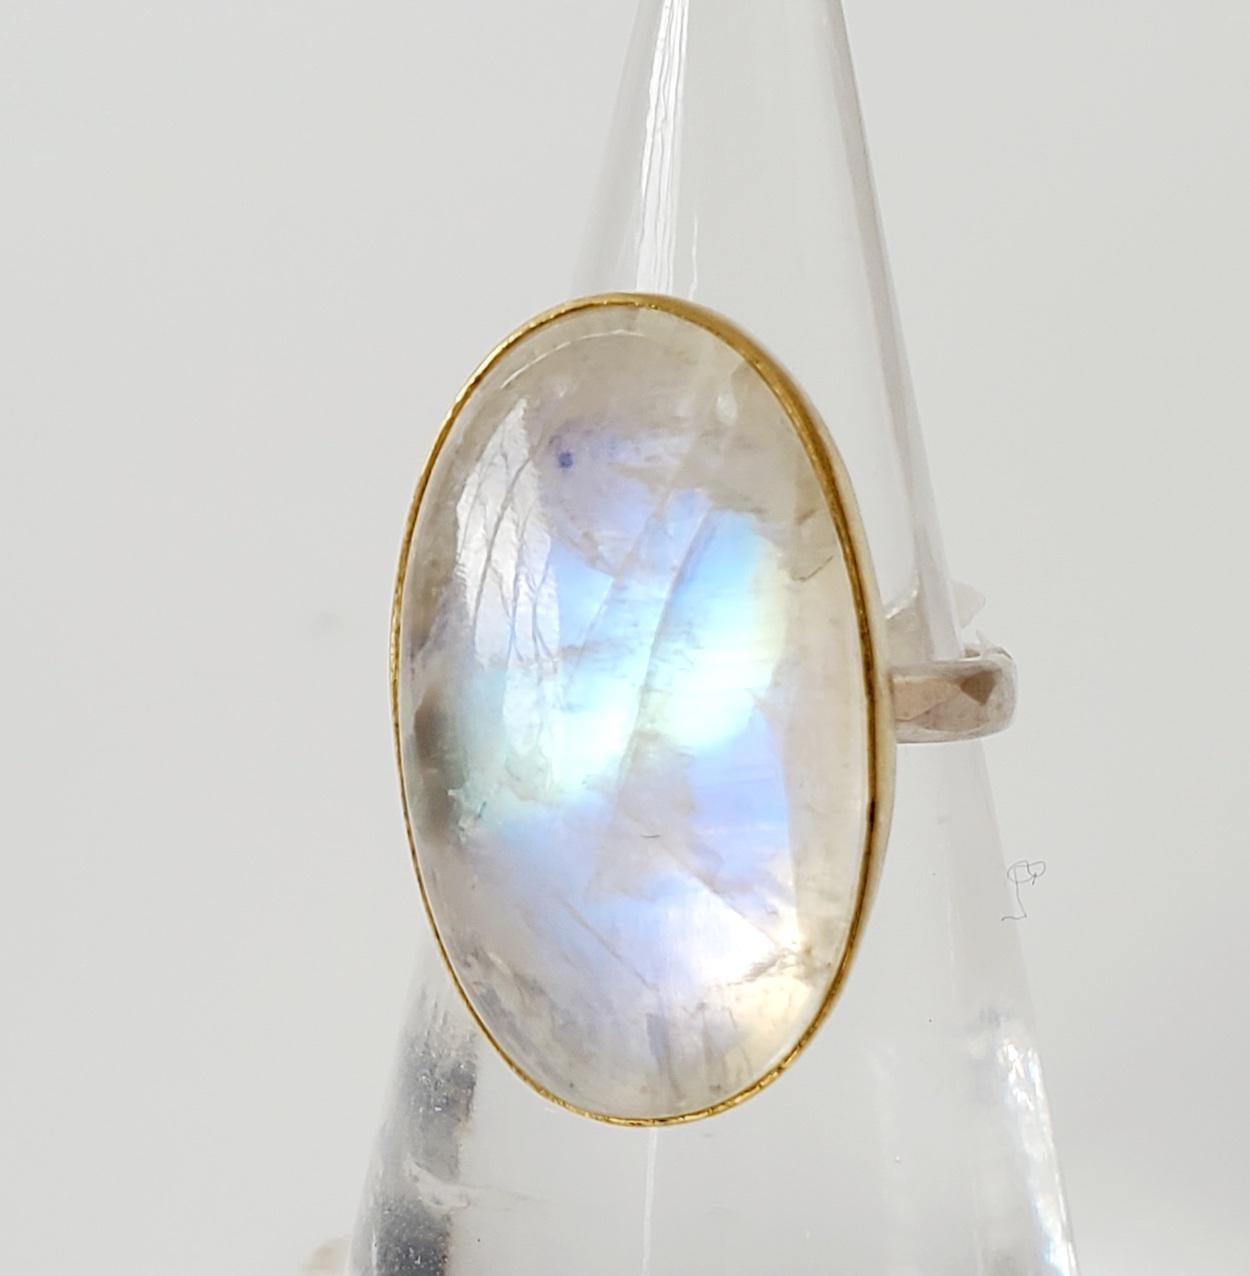 Big oval cabochon rainbow moonstone ring. This natural rainbow moonstone cabochon gemstone, has a lovely, mysterious flash. Handset in a 22K gold bezel, on a sterling silver back and band, with a brush finish. Rainbow moonstone cabochon: 20 carats.